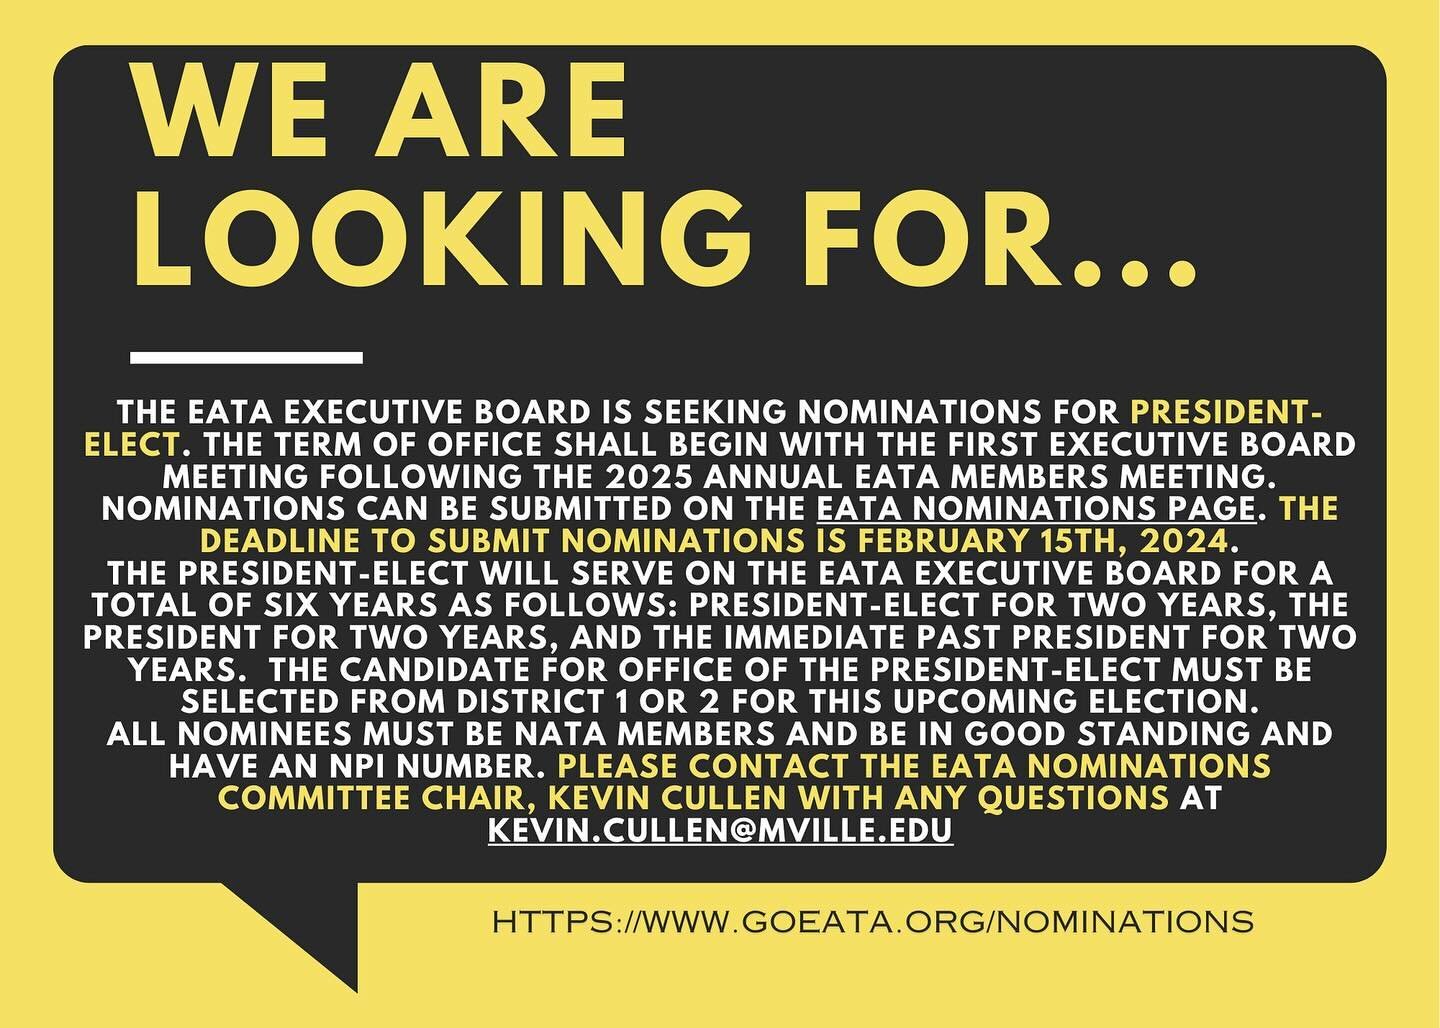 The EATA is seeking nominations for president-elect!